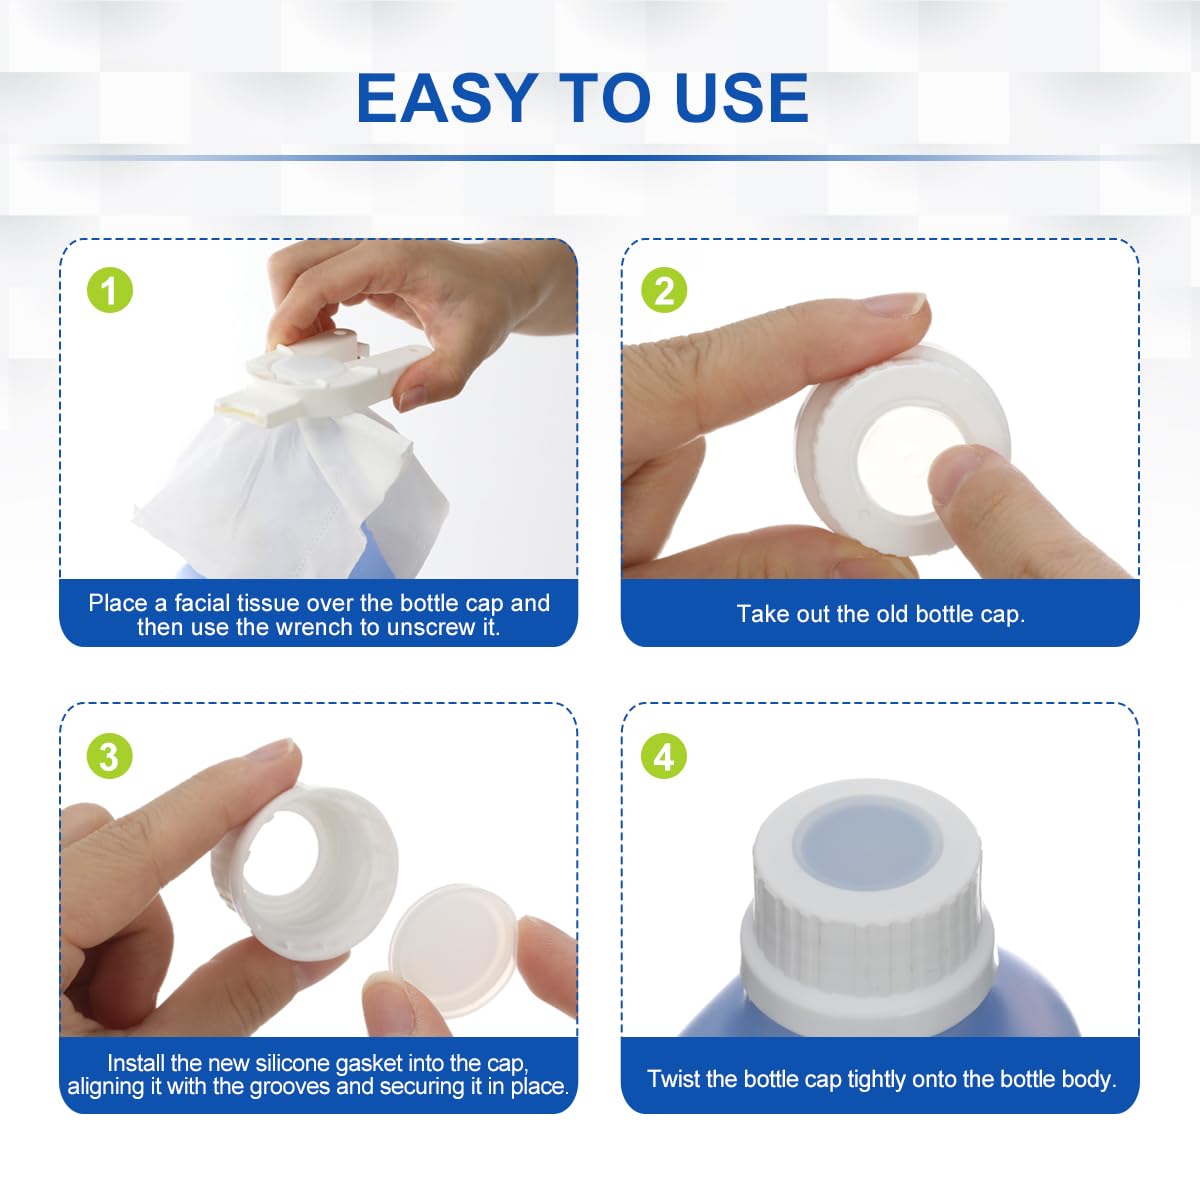 how to use replacement bpttle cap : 1. place a facial tissue over the bottle cap and then use the wrench to unscrew it; 2. take out th old bottle cap; 3.install the new silicone gasket into the cap, aligning it with the grooves and securing it in place; 4.twist the bottle cap tightly onto the bottle body.